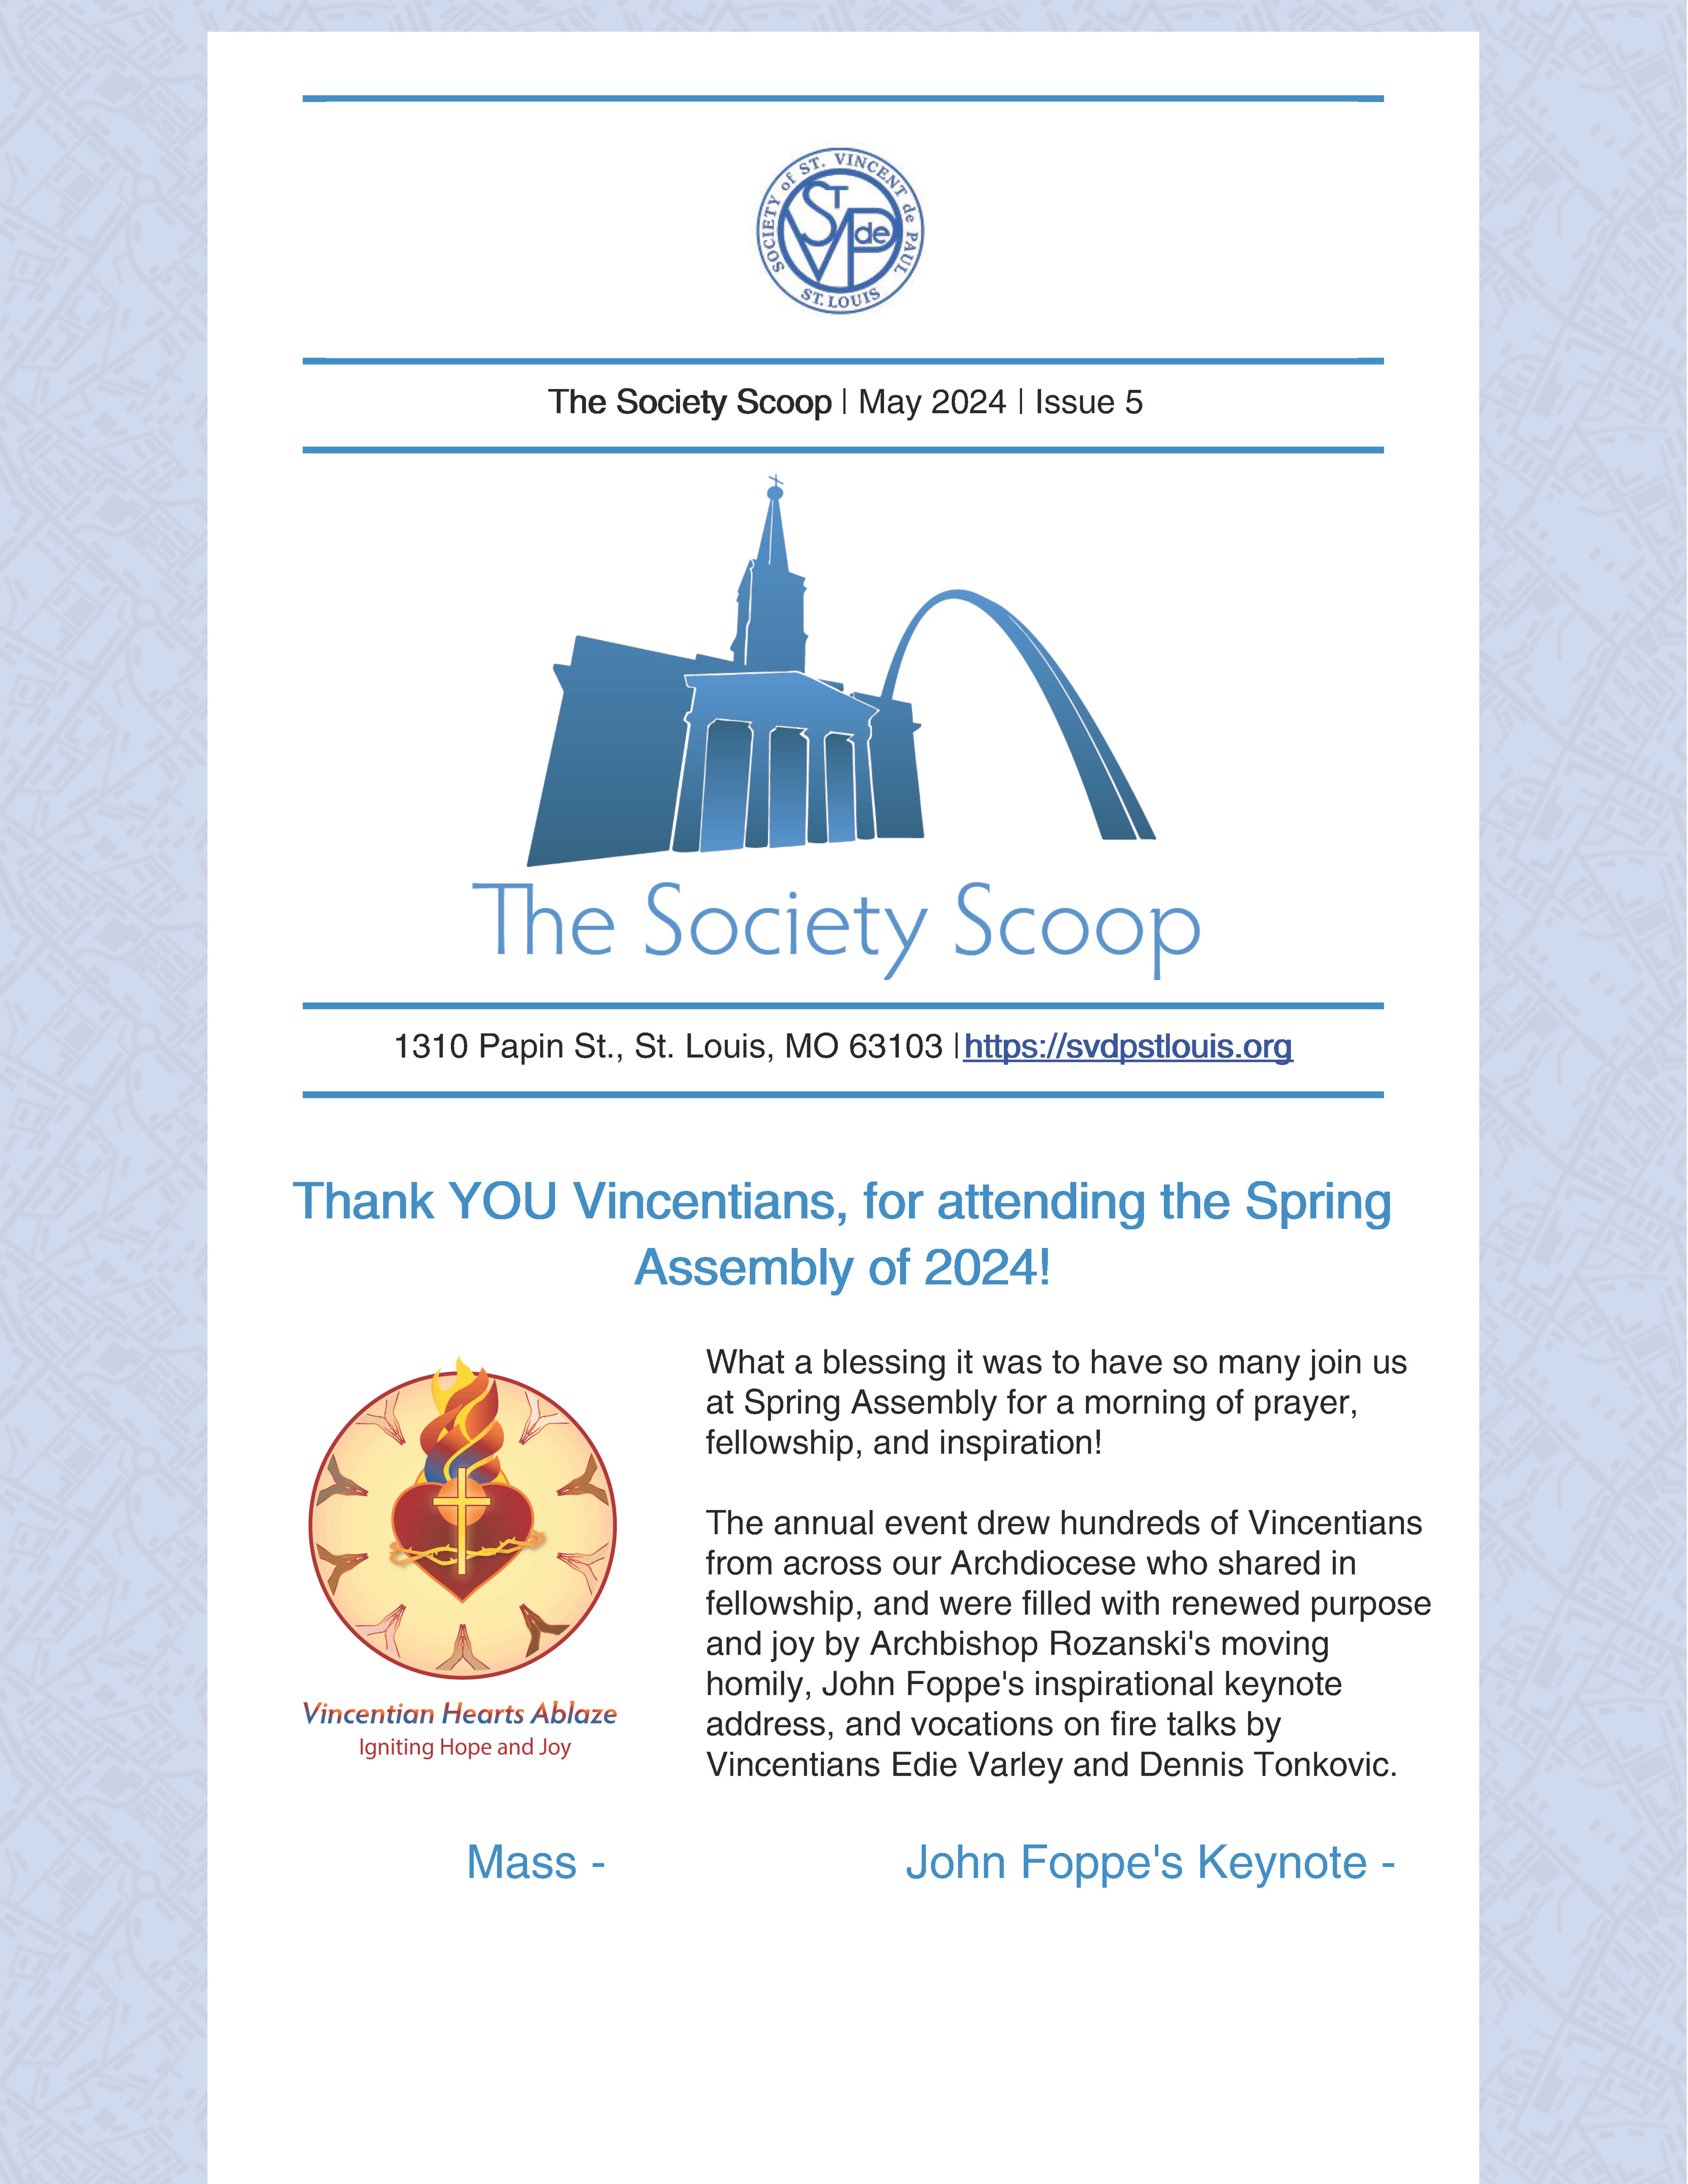 The Society Scoop May 2024 